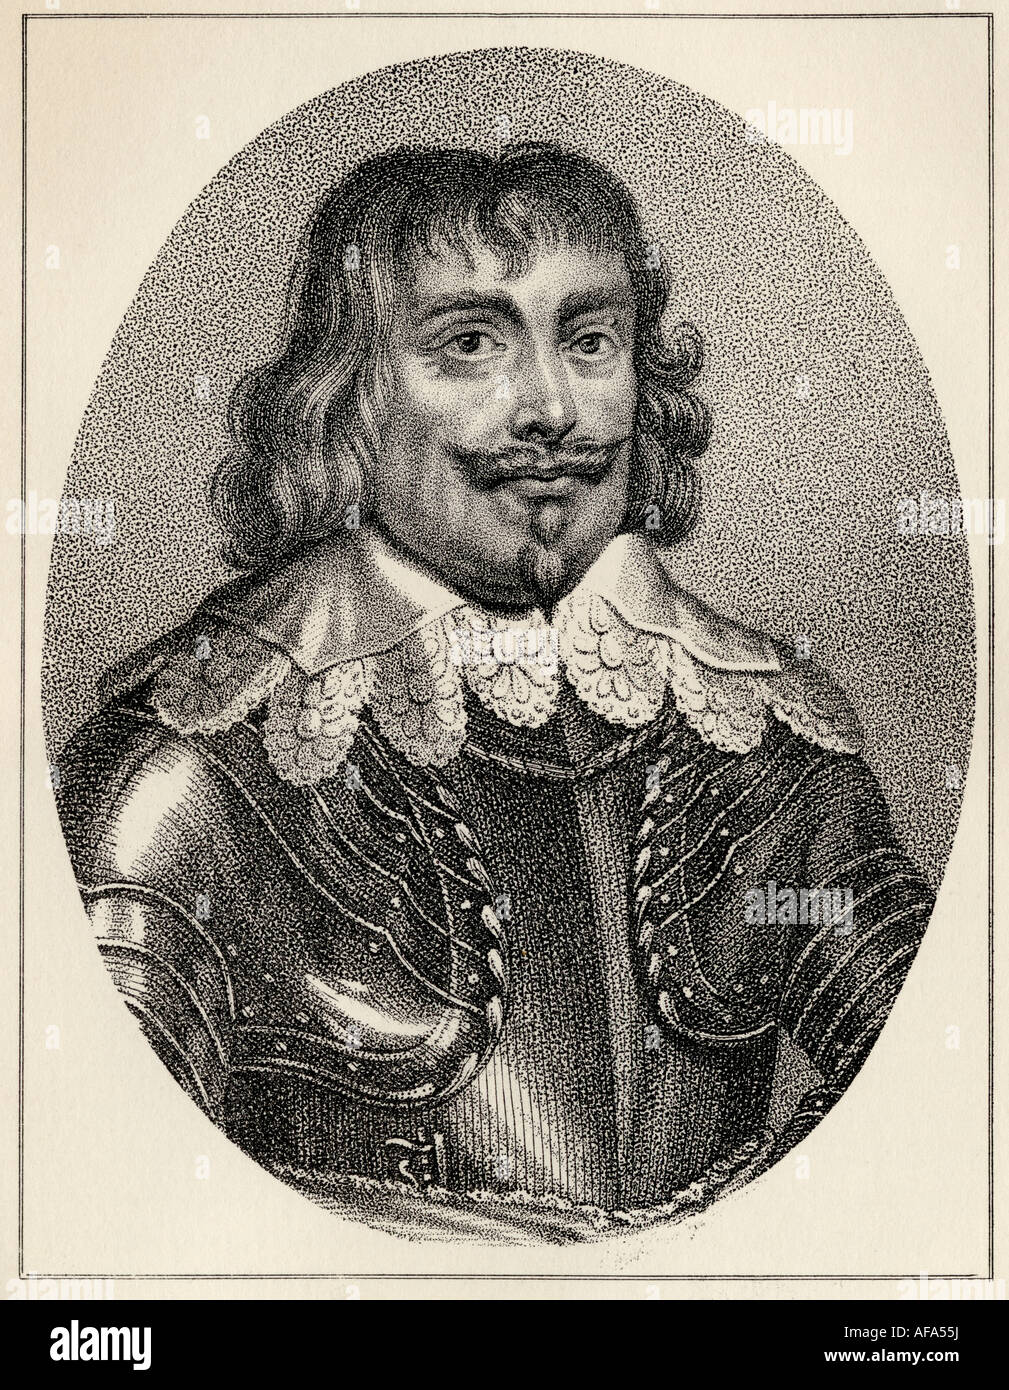 Robert Devereux, 3rd Earl of Essex, 1591-1646, Viscount Hereford, Lord Bourchier.   English nobleman. Stock Photo